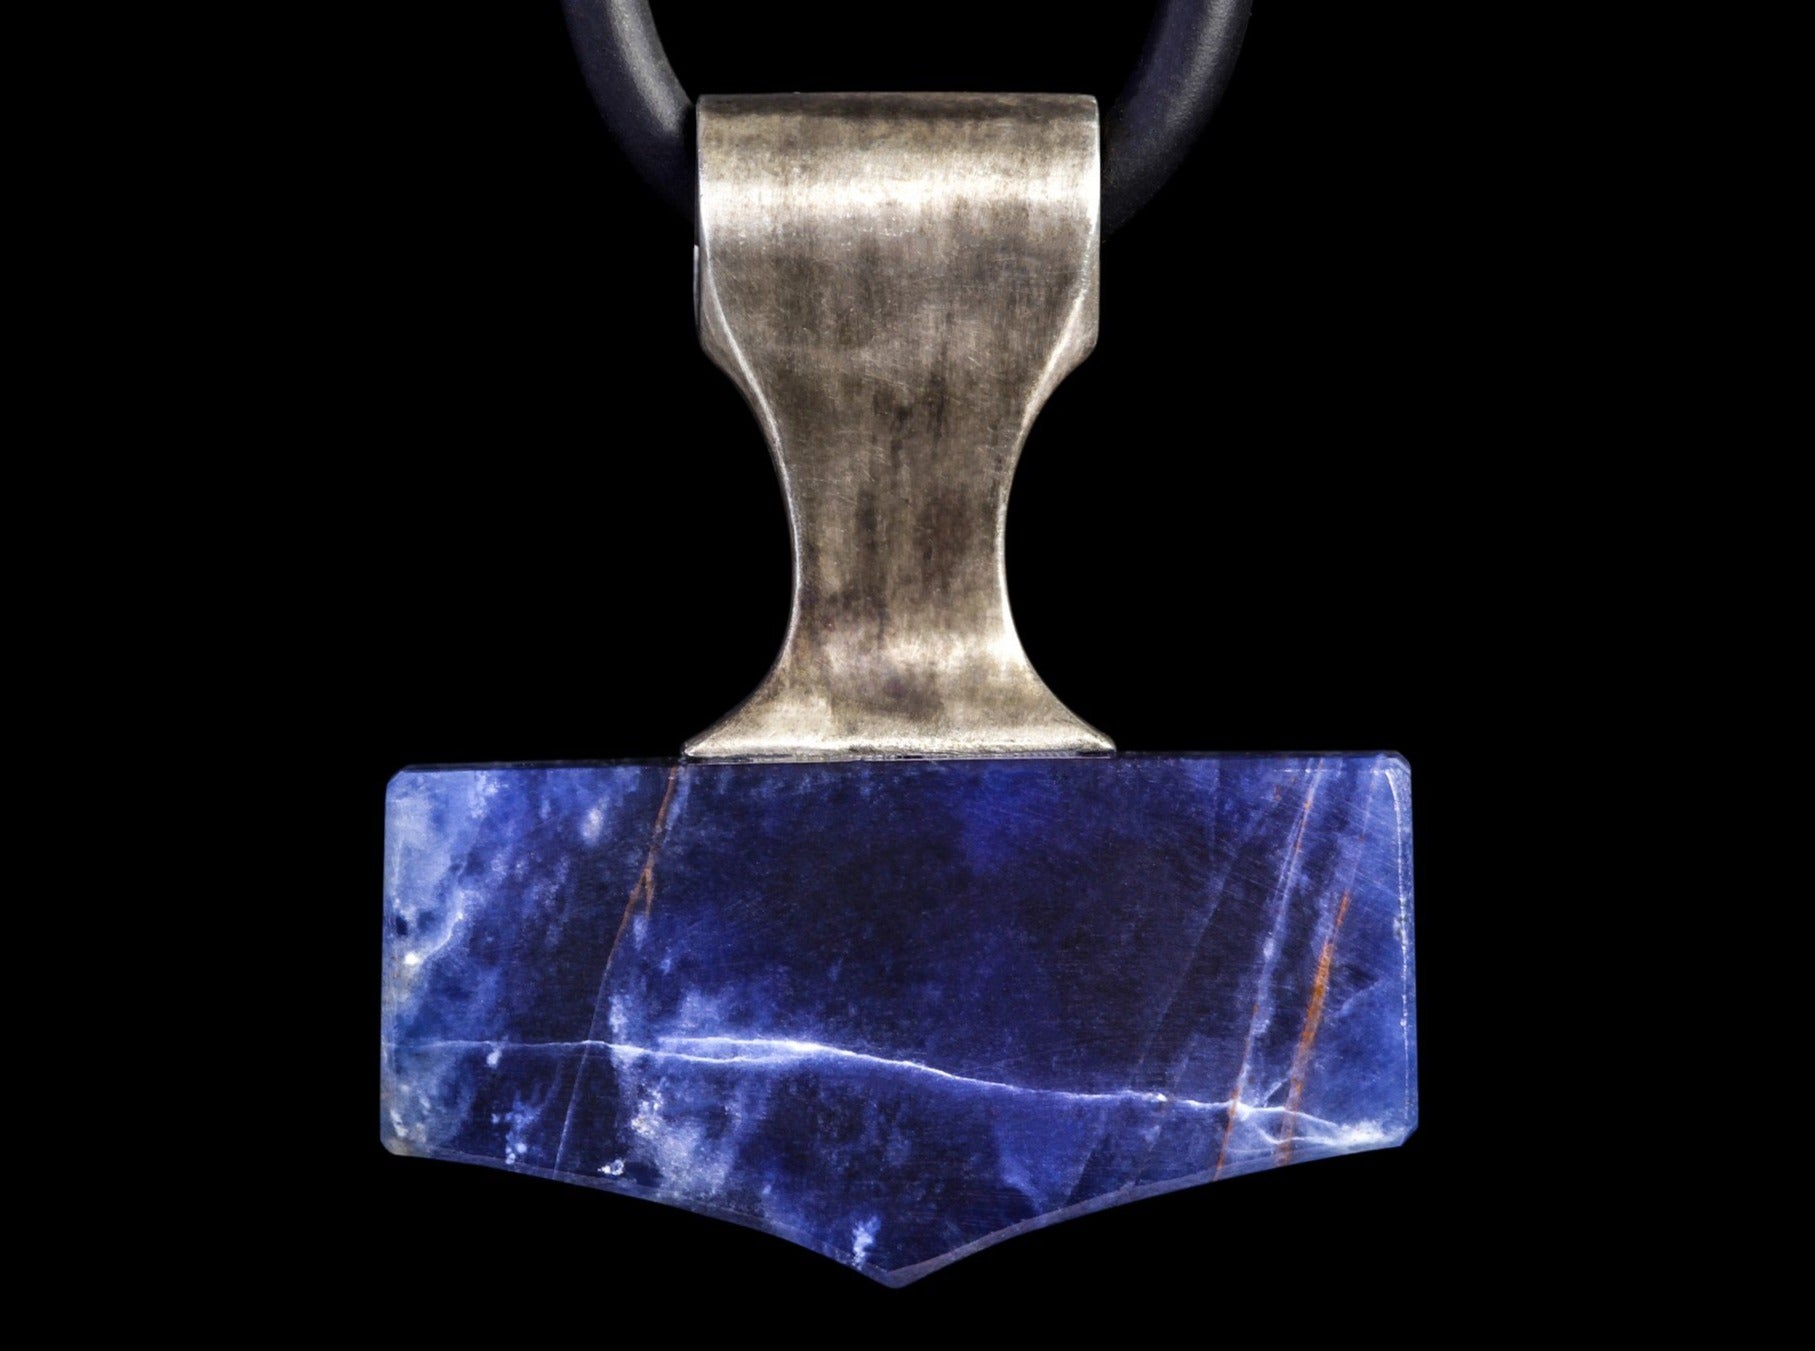 mjolnir amulet made of silver and Sodalite stone in deep blue color